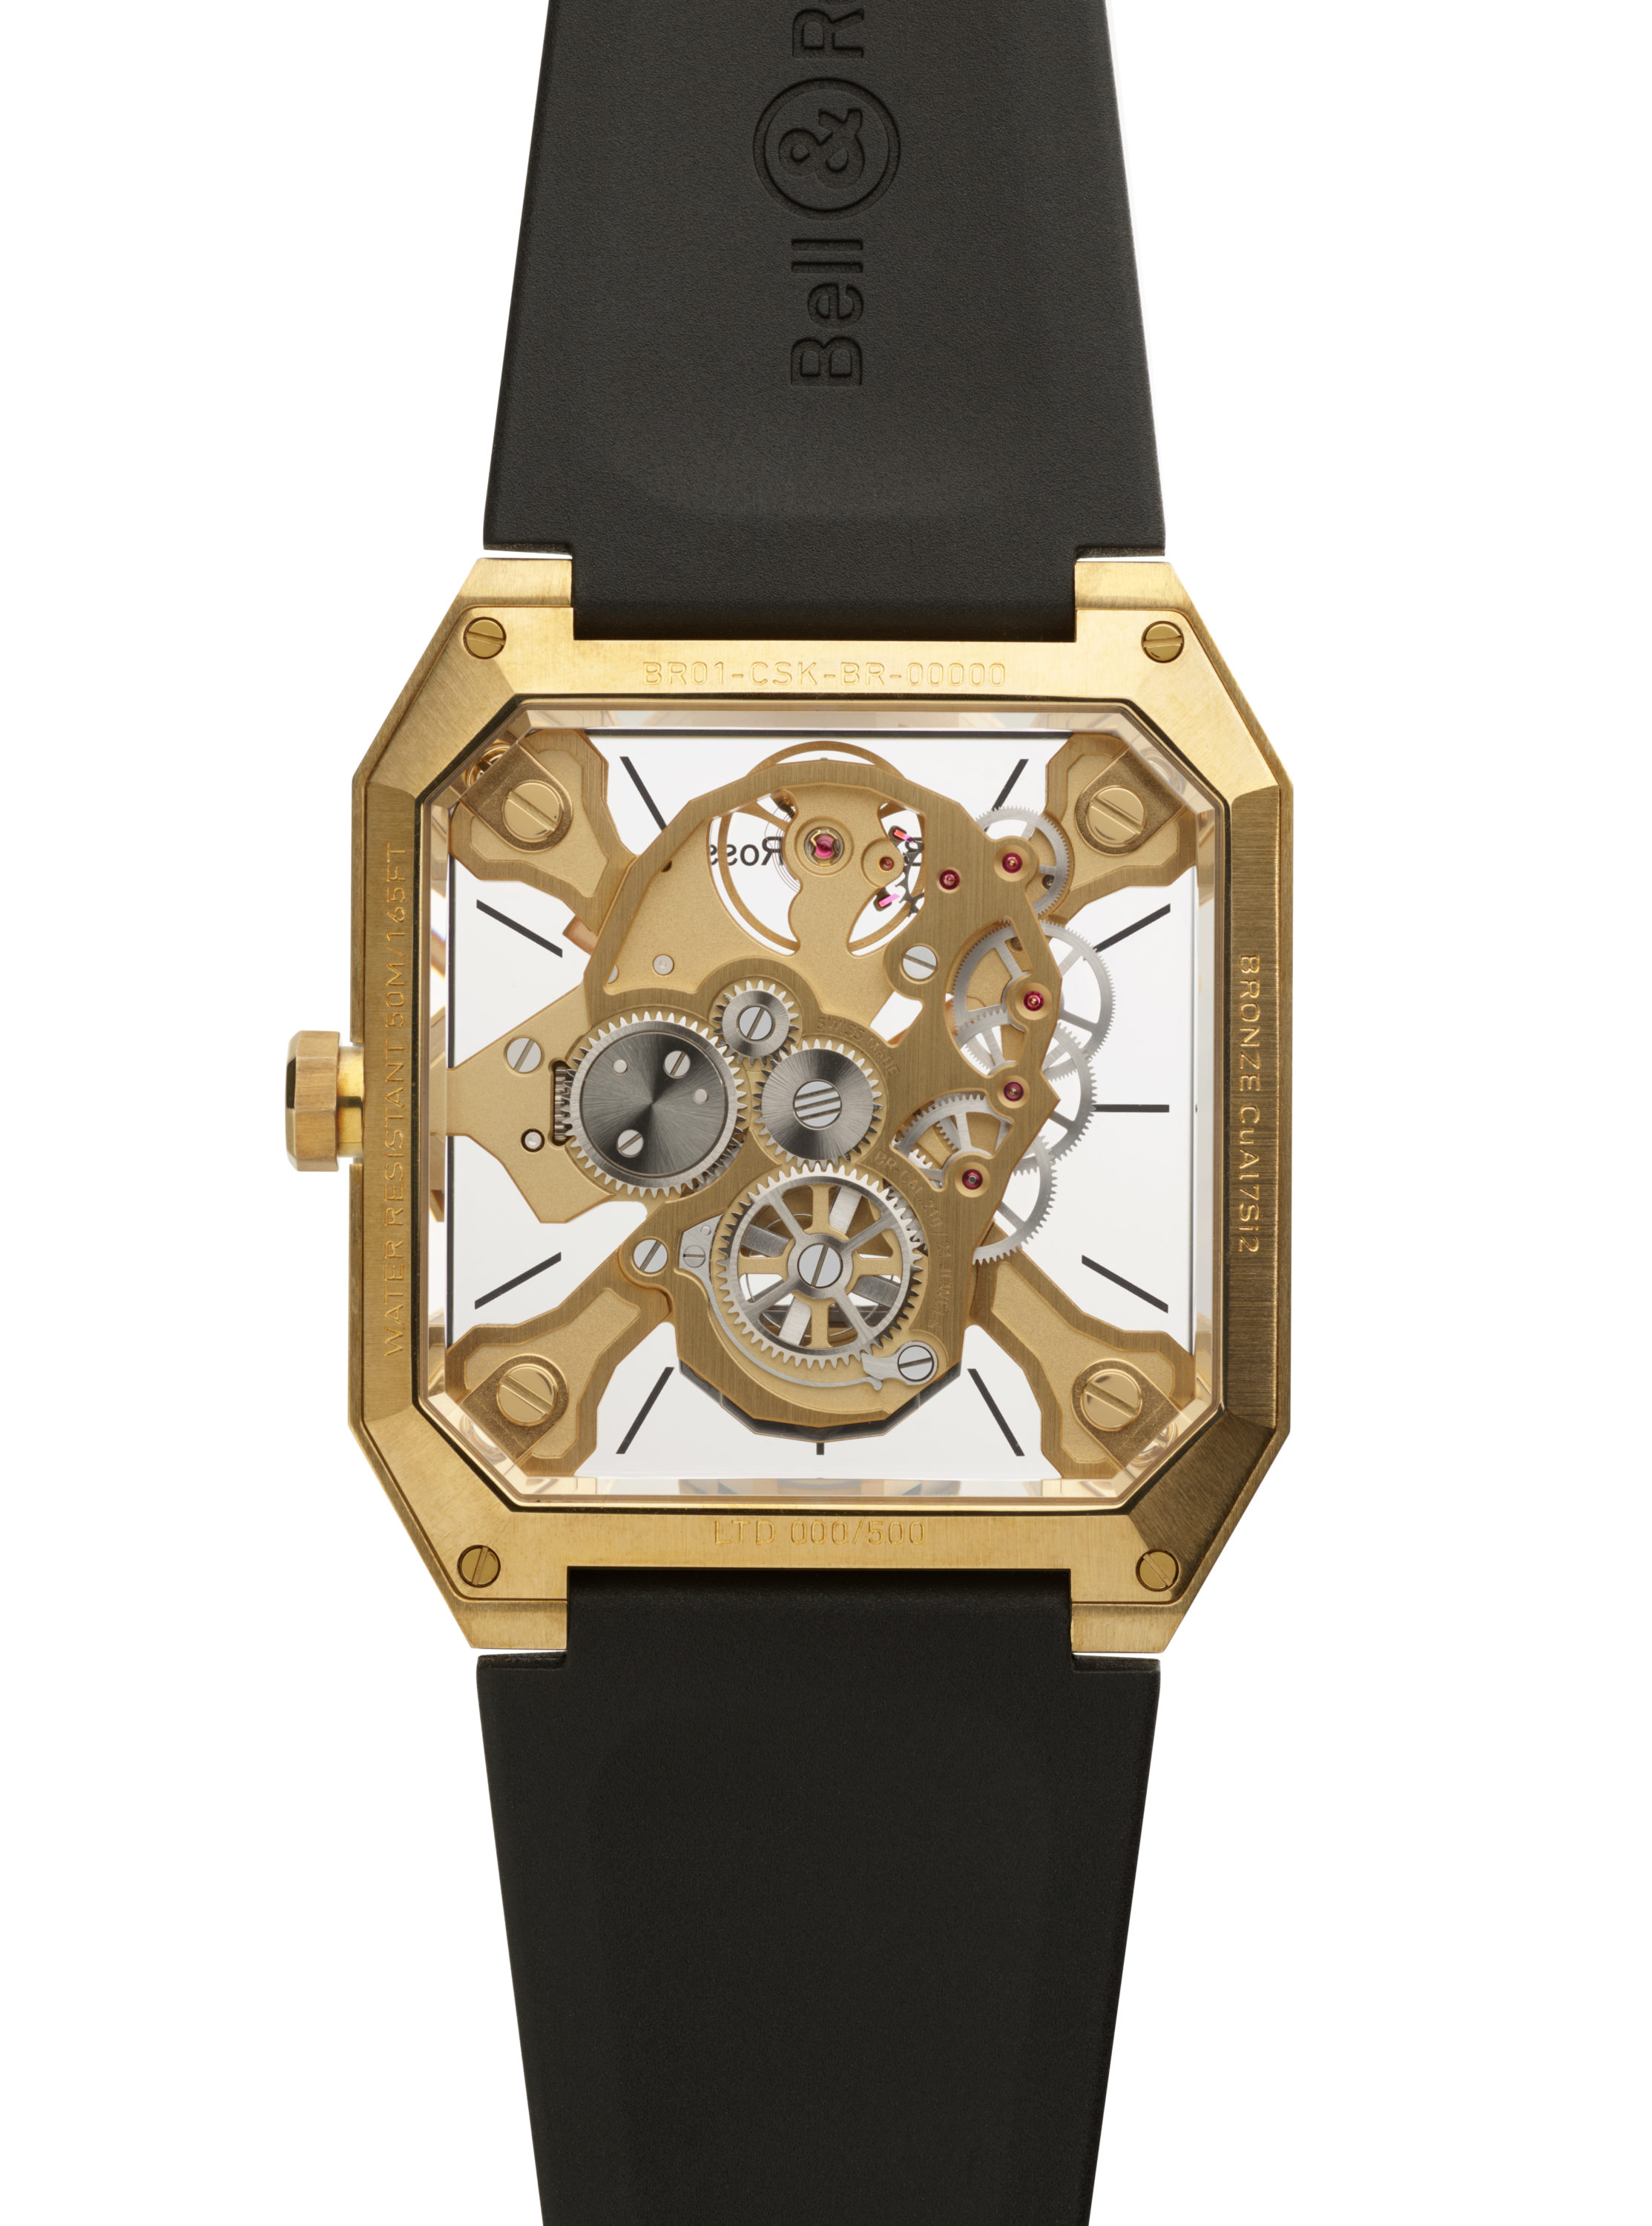 Jaw-Dropping: Bell & Ross Introduces BR 01 Cyber Skull Bronze with Automaton Function